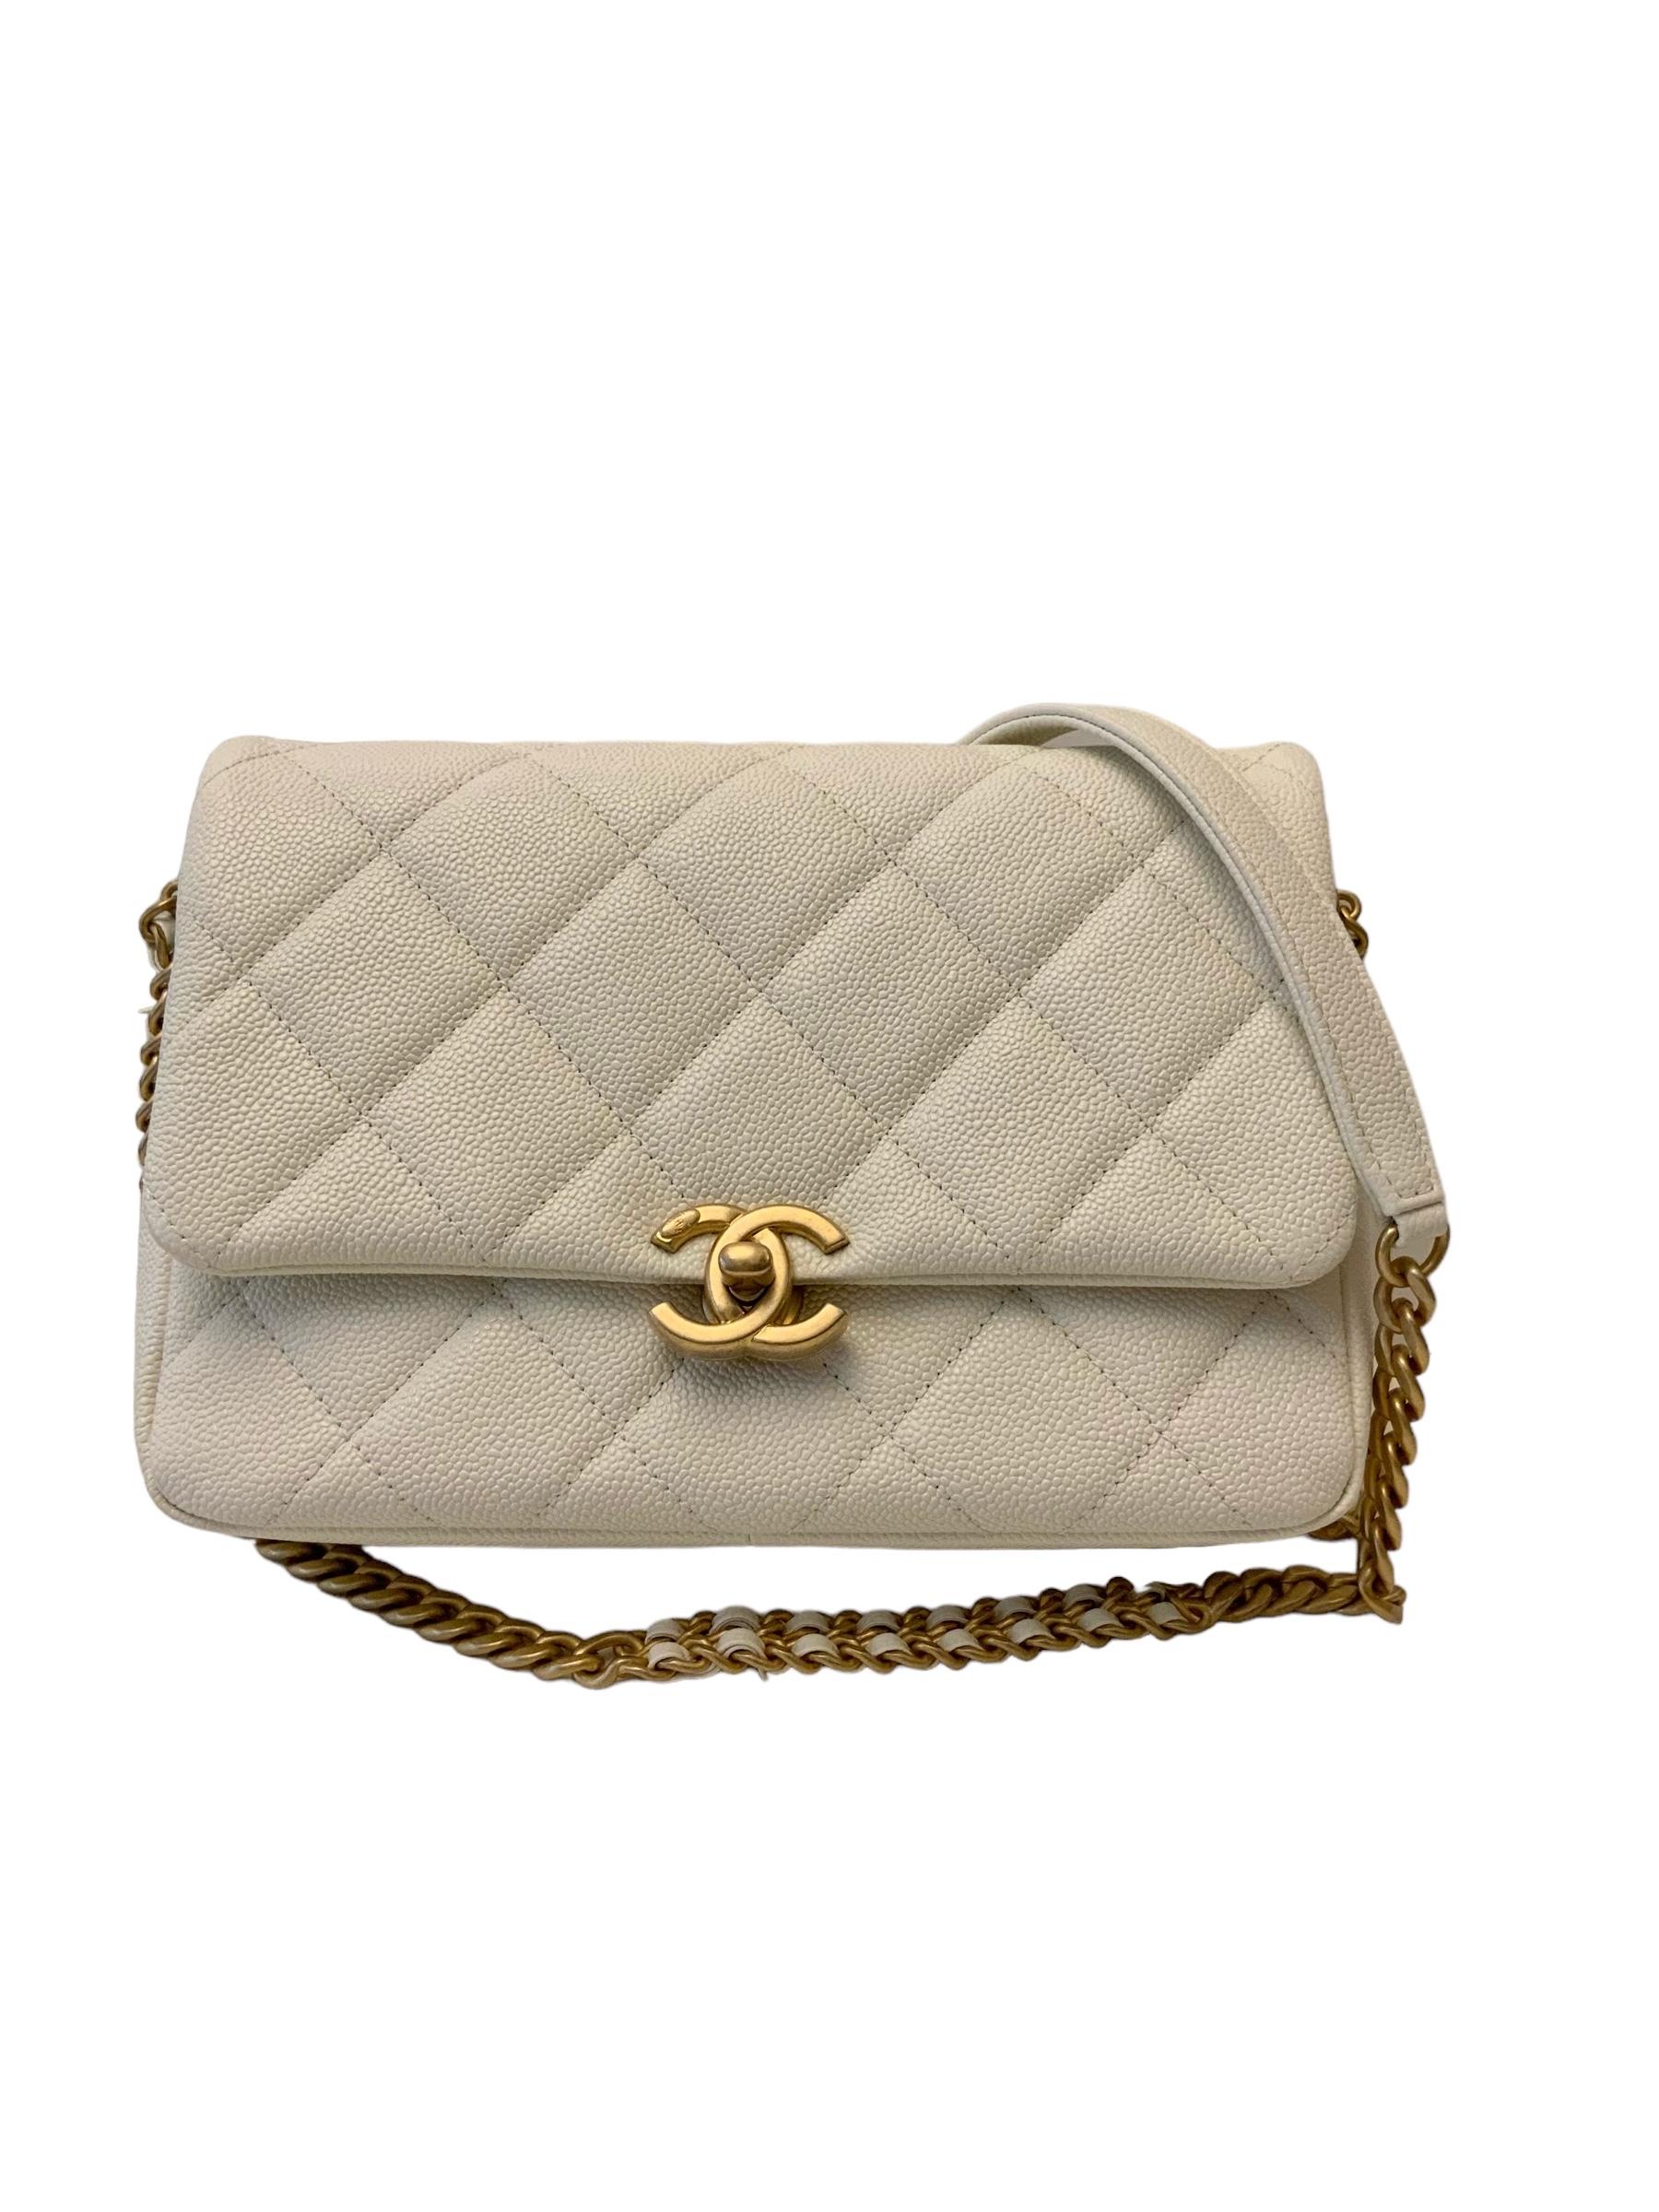 Chanel 22P Melody Flap White Caviar Small Bag  For Sale 5